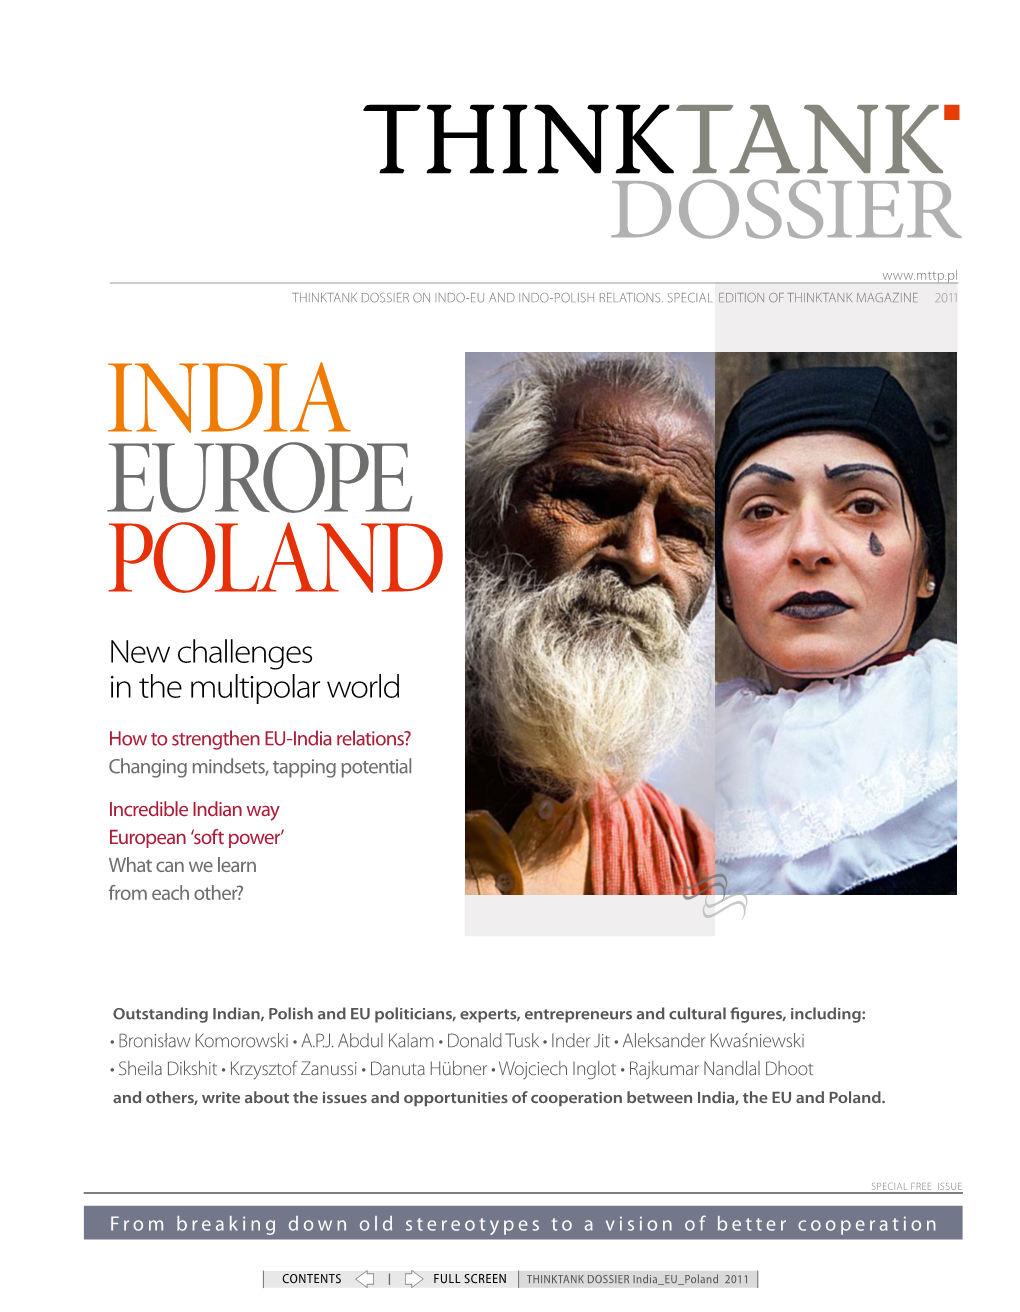 India Europe Poland New Challenges in the Multipolar World